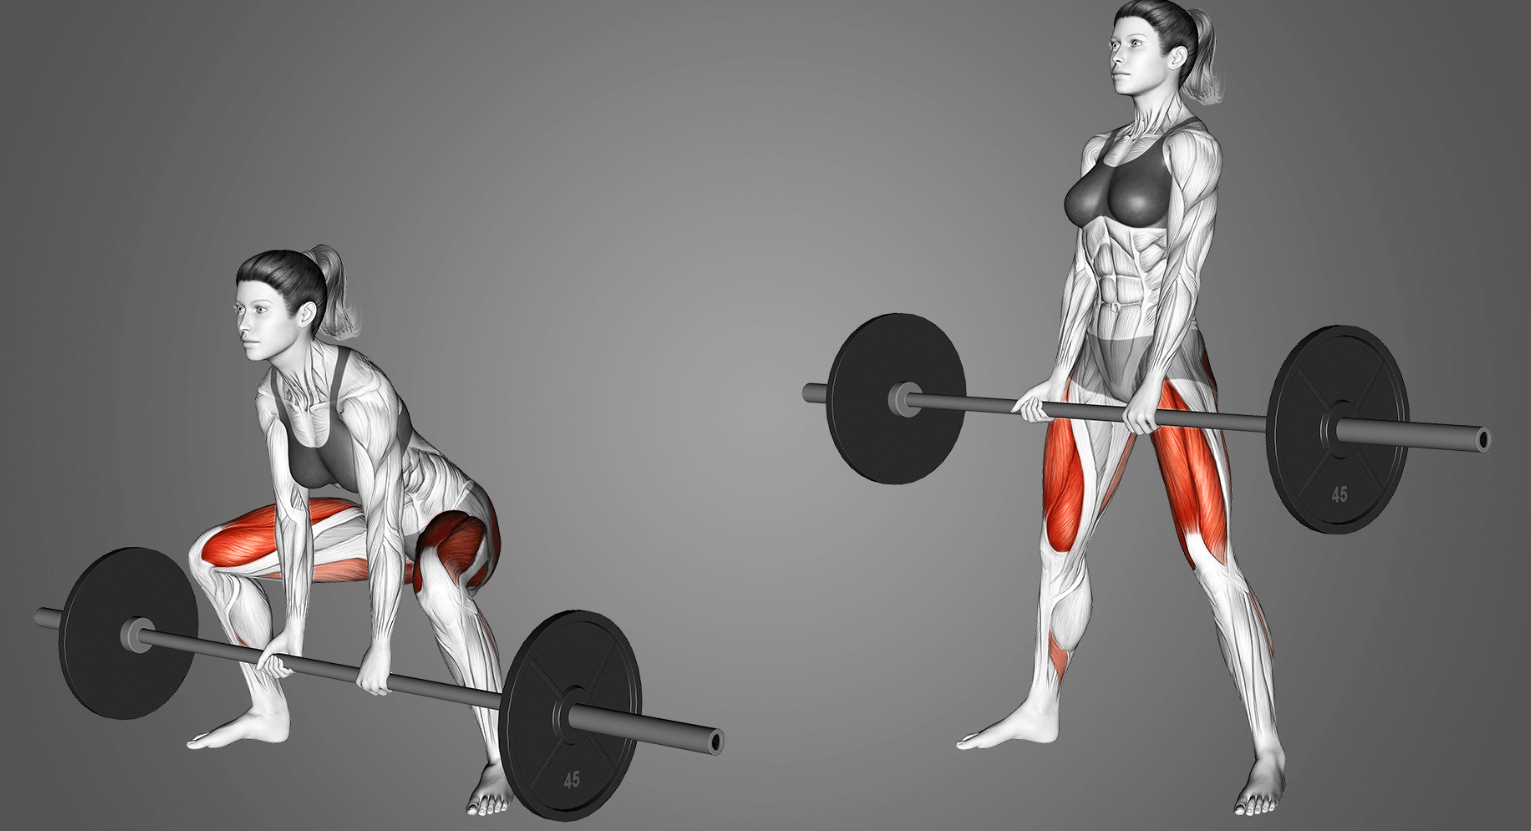 The Sumo Deadlift is a full body exercise that works the glutes, hamstrings, calves, quads, and core muscles